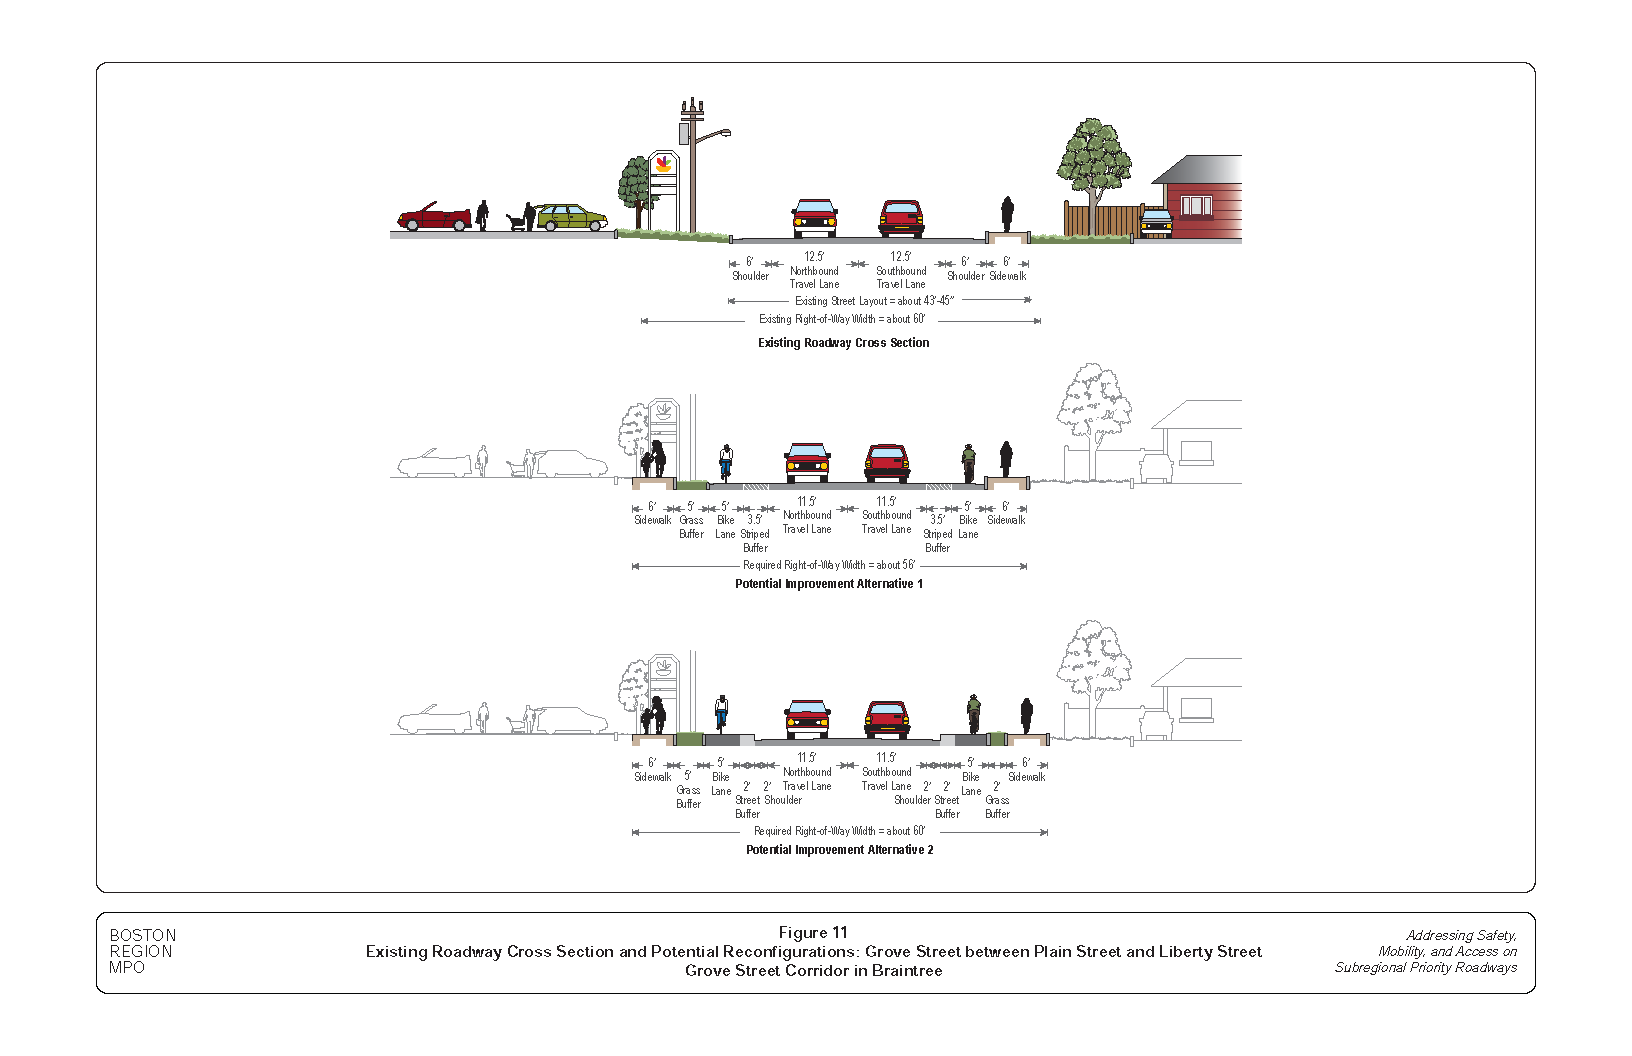 This figure shows the existing roadway cross section of Grove Street between Plain Street and Liberty Street and potential reconfiguration alternatives to accommodate all users of the roadway, including people who walk and bike.